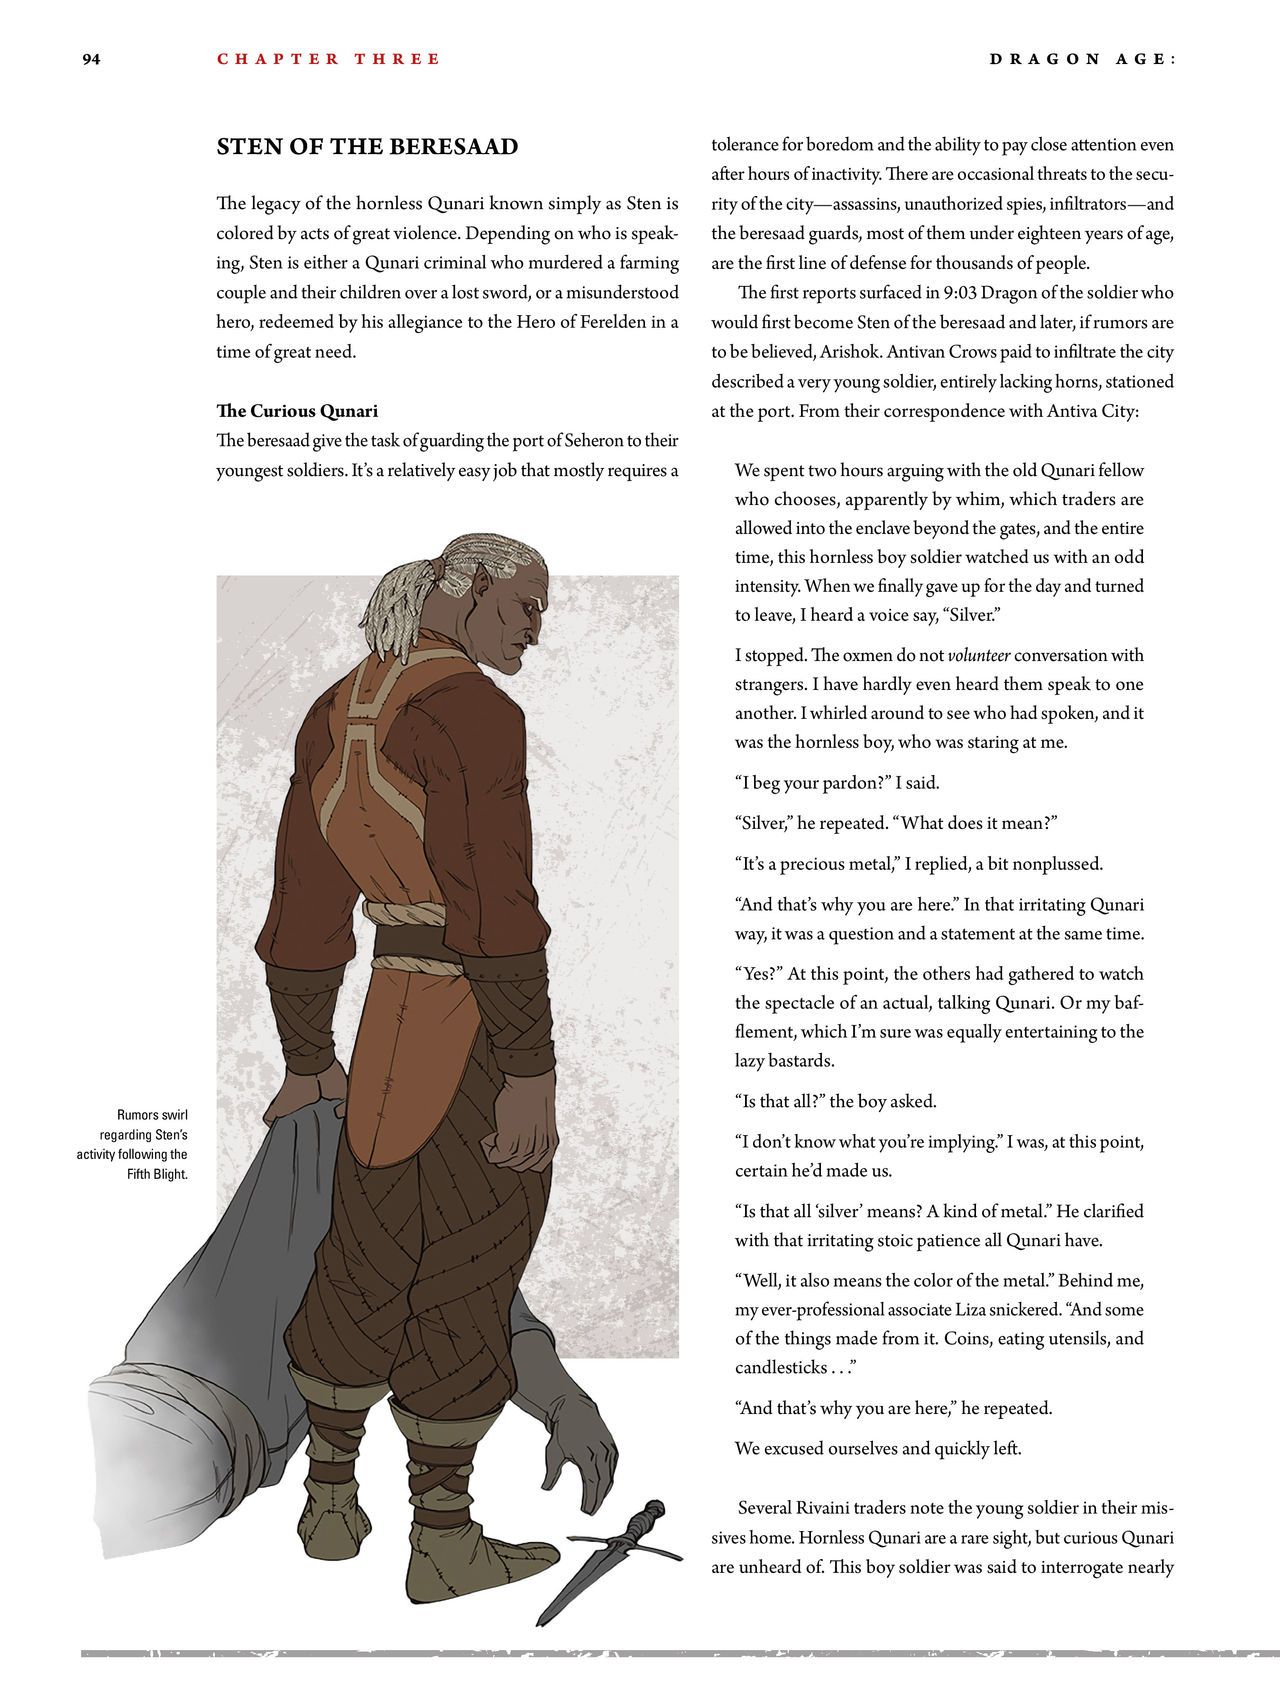 Dragon Age - The World of Thedas v02 90